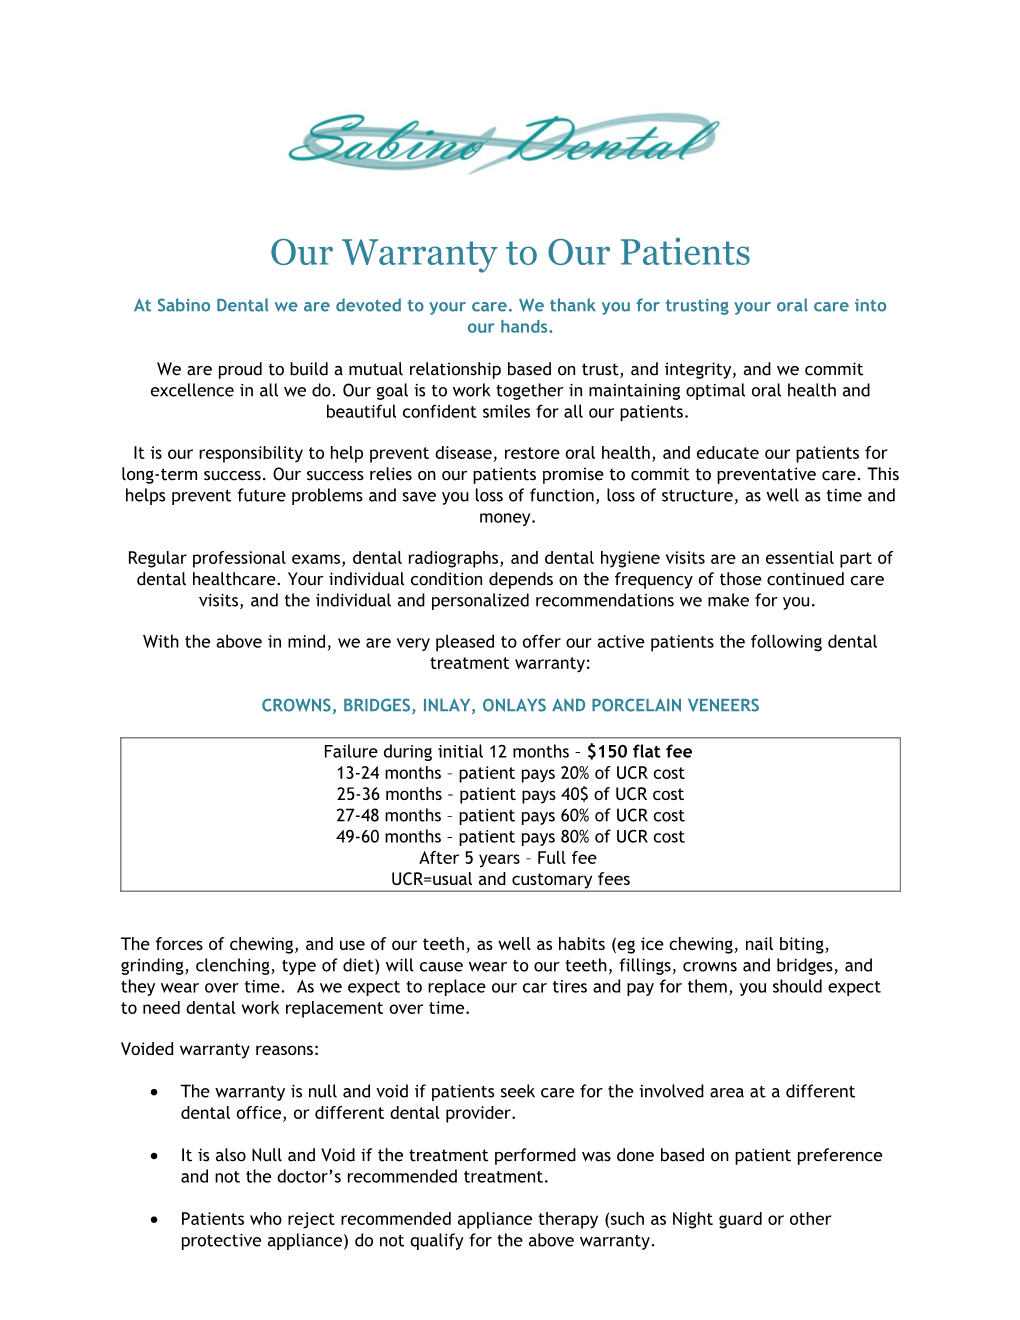 Our Warranty to Our Patients